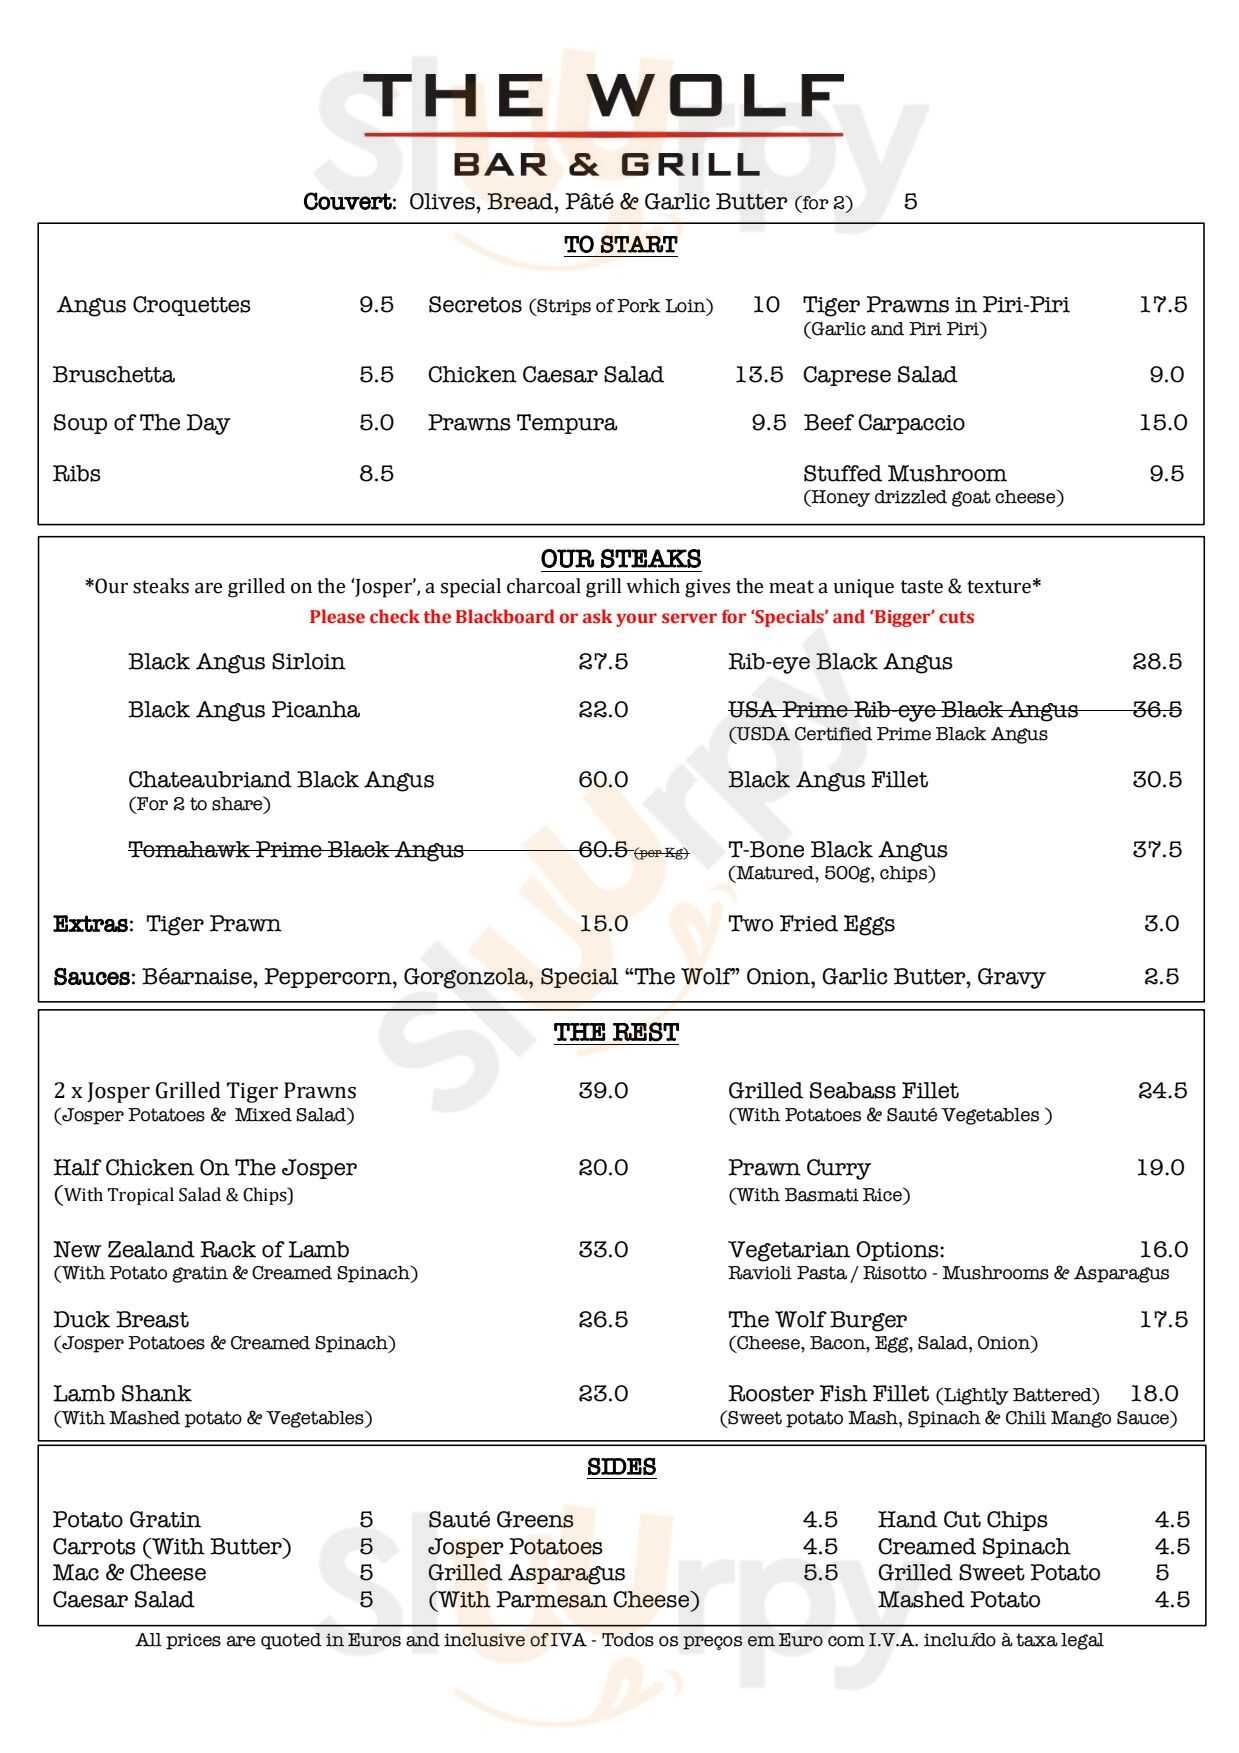 The Wolf Bar And Grill Carvoeiro Menu - 1